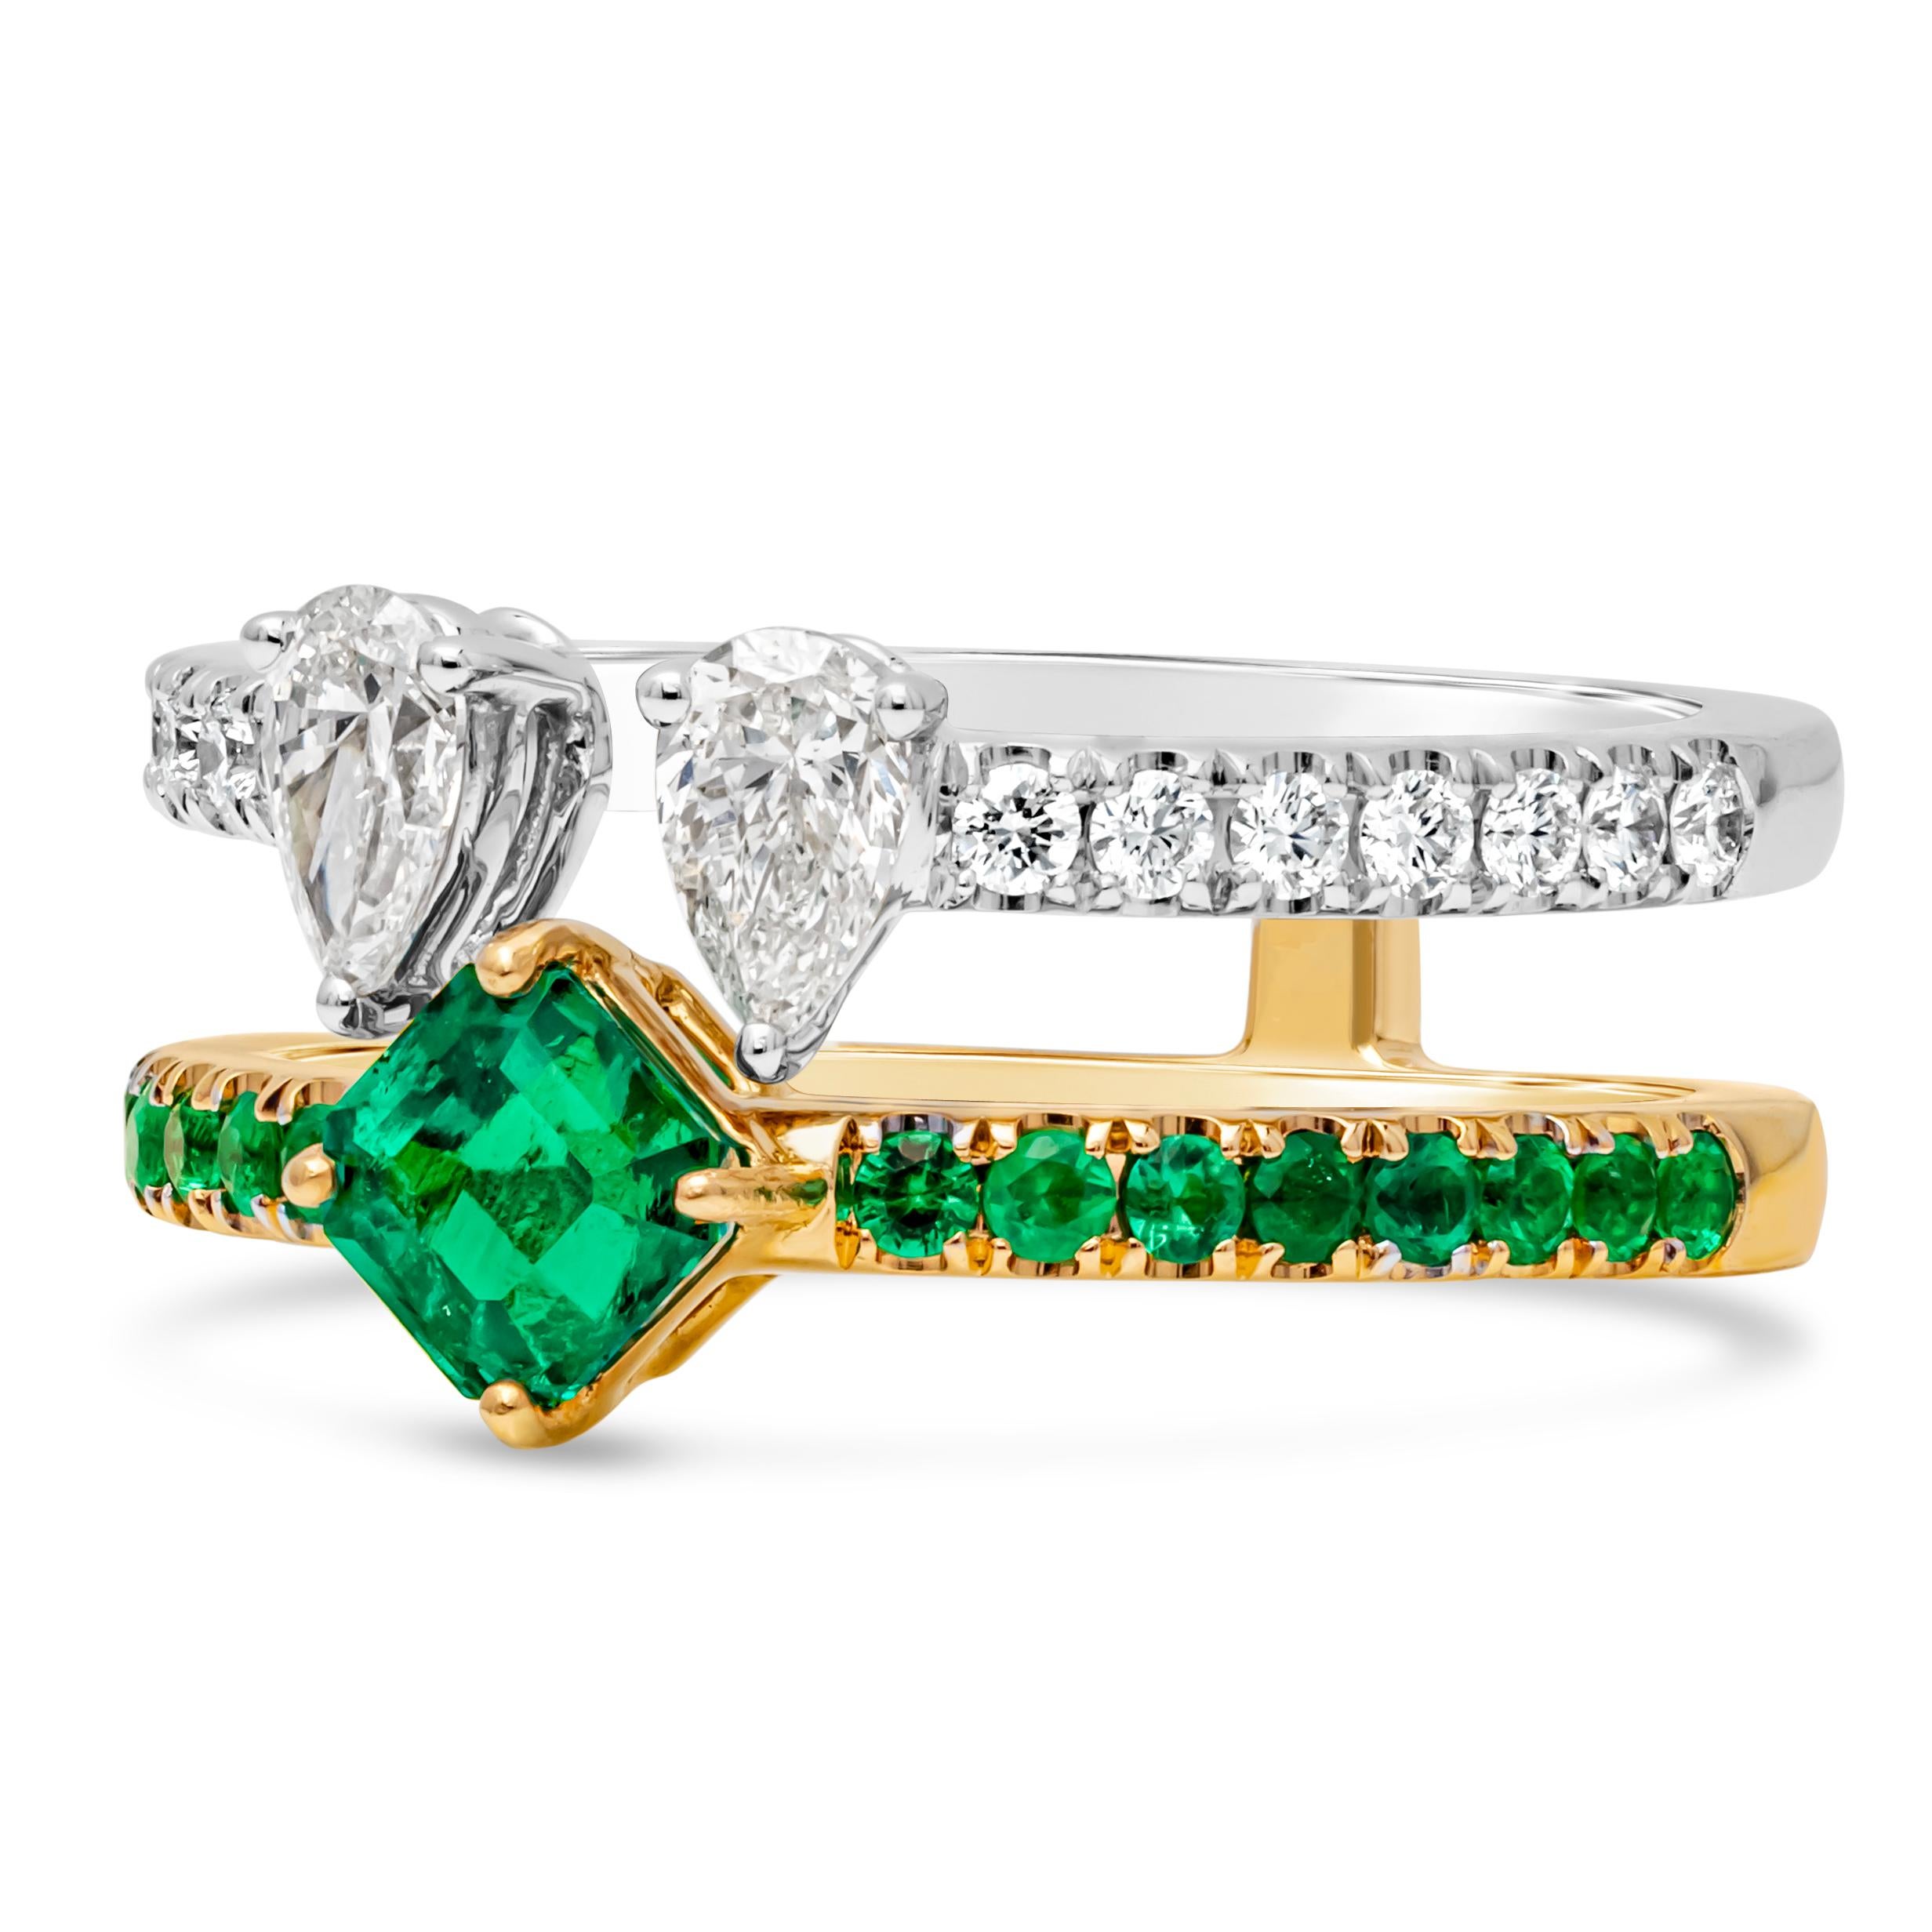 This exquisite double band fashion ring features a stunning combination of elegance and vibrancy. One band showcases octagon cut green emerald center stone, accented with pave round melee green emerald, set in a 18K Yellow Gold. While the other